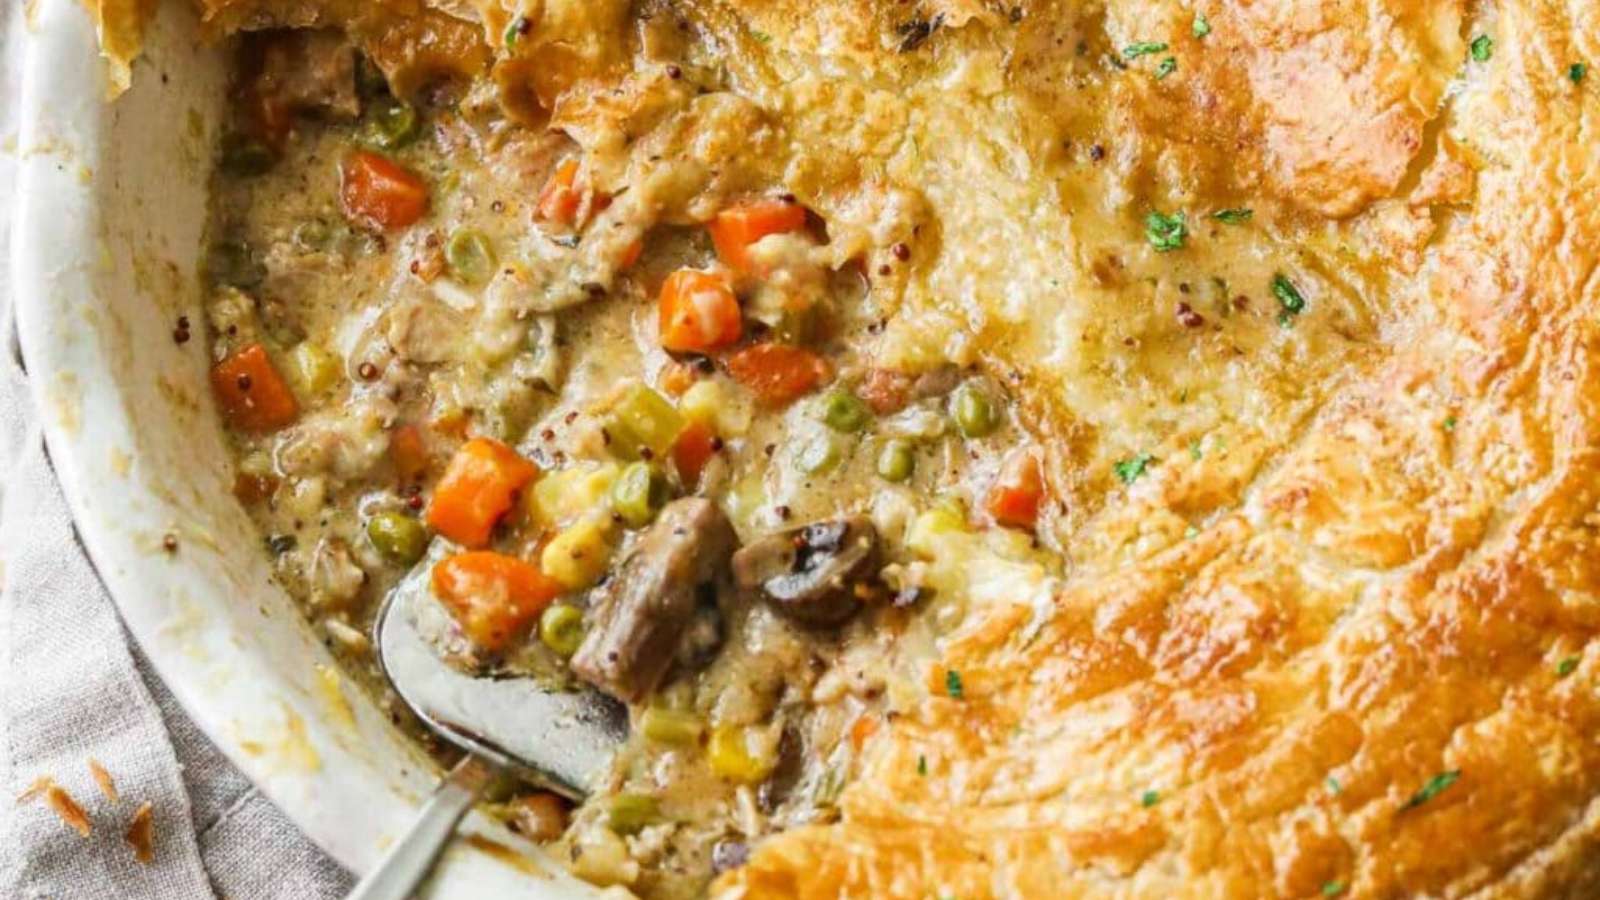 A pie with vegetables in it.